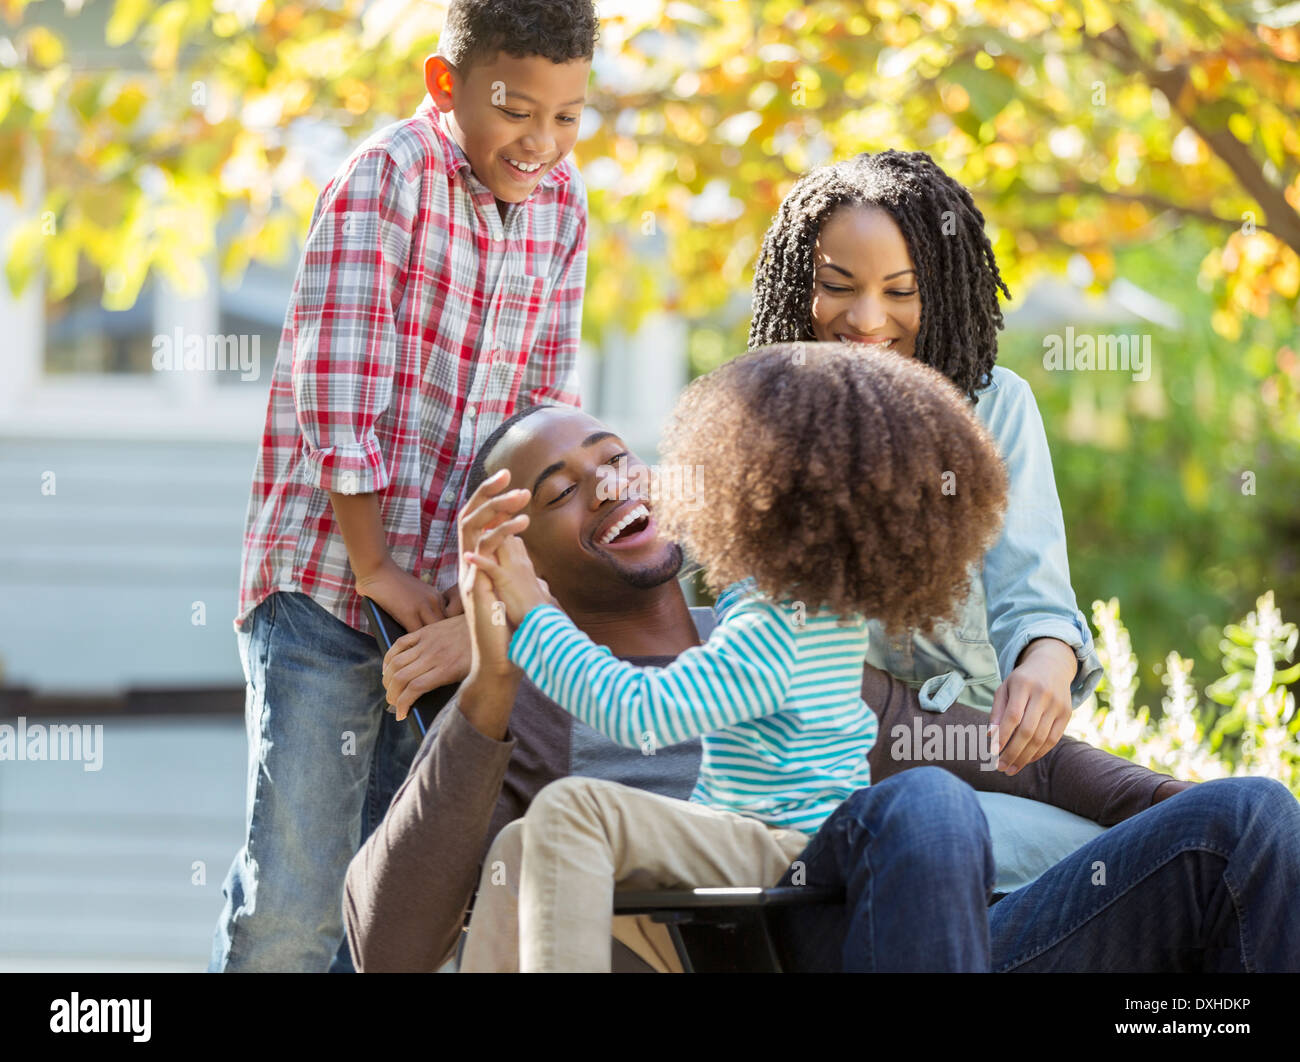 Happy family laughing outdoors Stock Photo